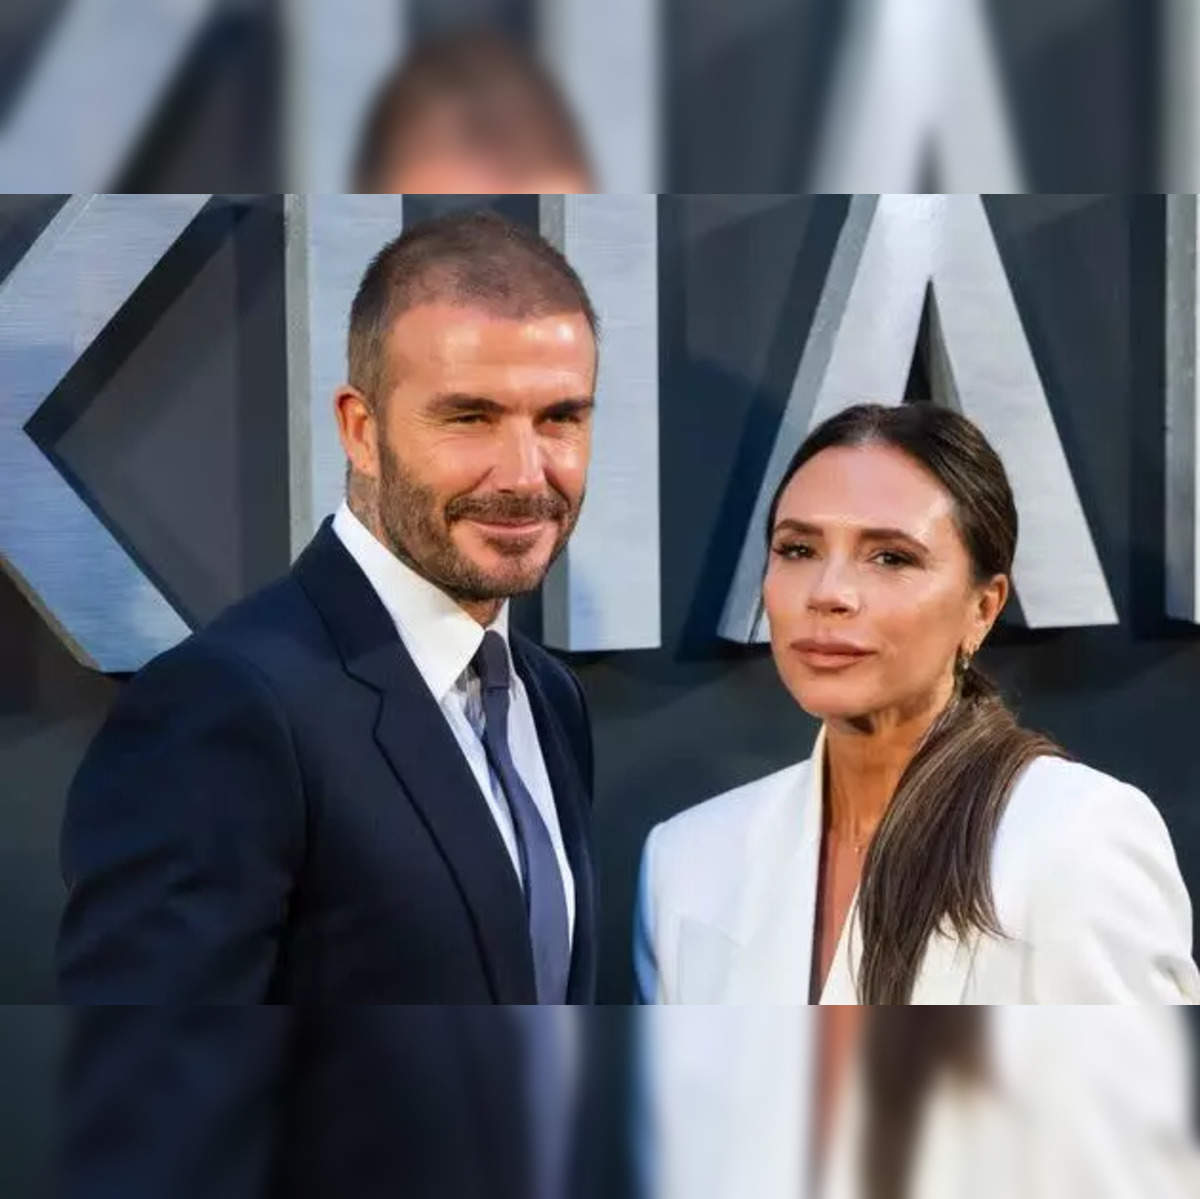 Victoria and David Beckham Style Transformation - Victoria and